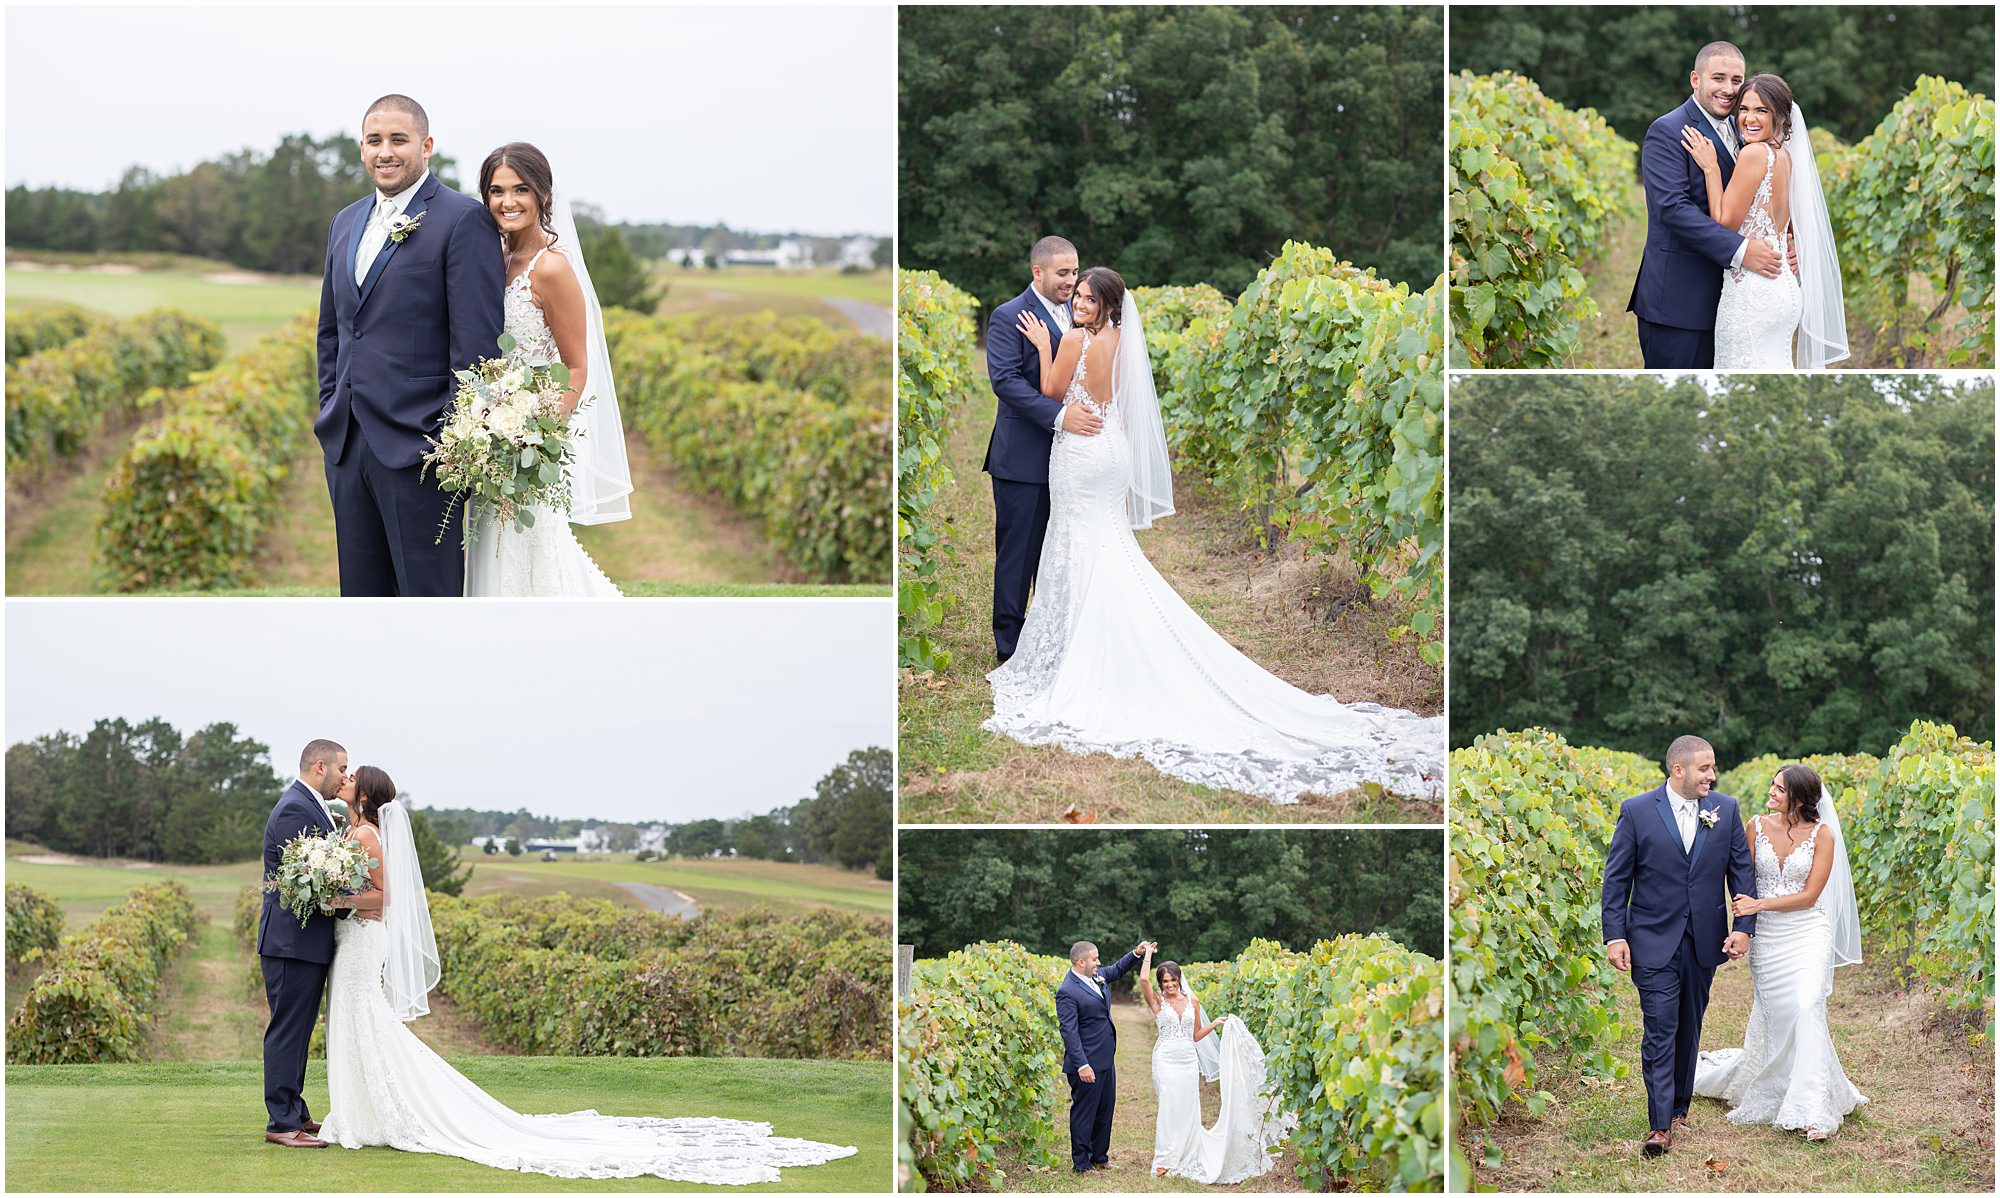 Renault Winery in Egg Harbor is one of the best Wedding Venues in South Jersey because the vineyards are beautiful for portraits. 